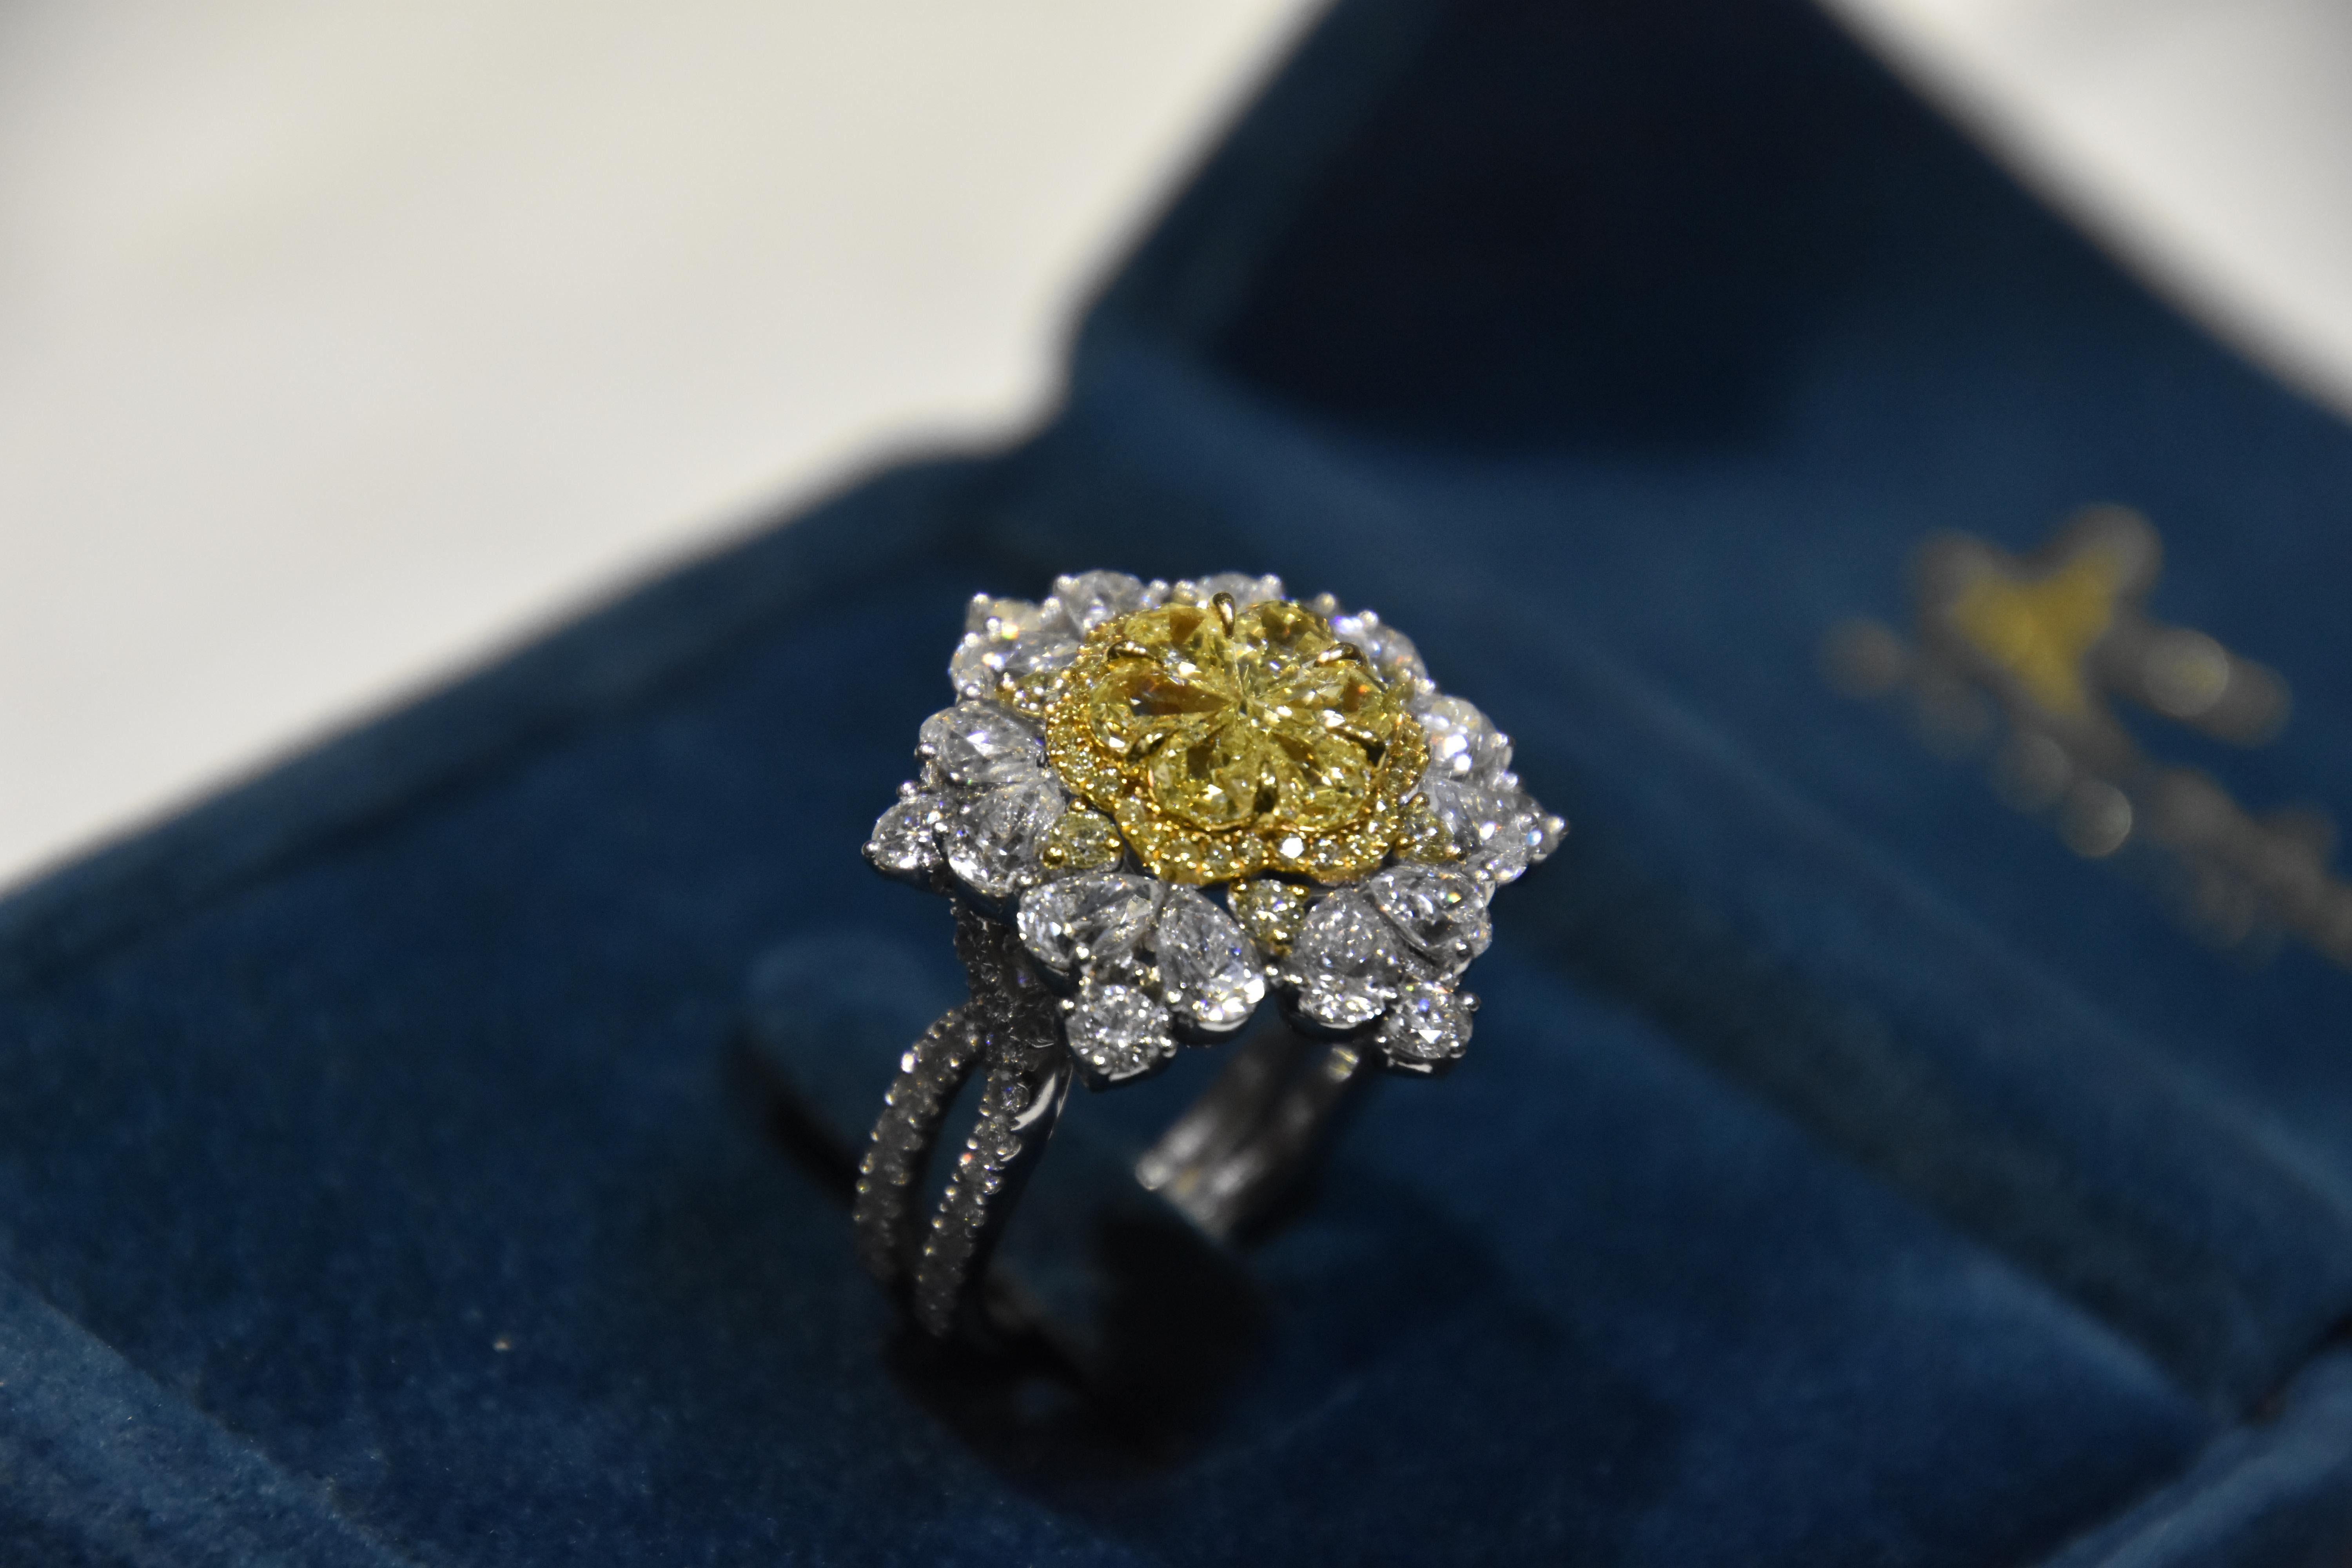 6 pcs of pie cut diamond composed into a Flowery designed ring. A total 1.51 carat Fancy Yellow Diamond with  0.4 carat yellow diamond halo and 4.19 carat white diamond on the outer frame. 

Ring size- US 6.5,   Kahn also provide engraving, resizing